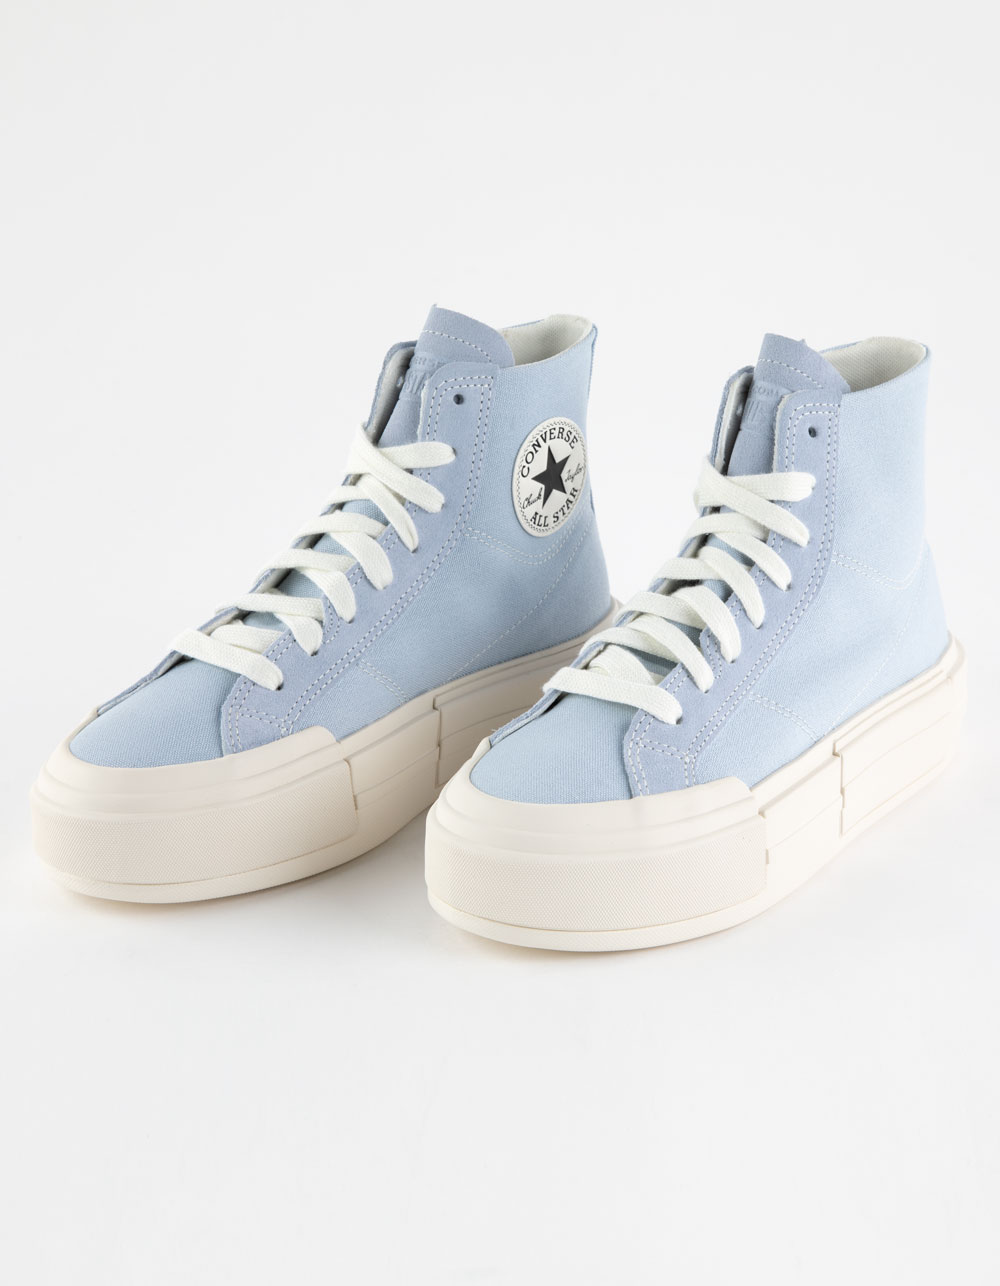 CONVERSE Chuck Taylor All Star Cruise Womens High Top Shoes